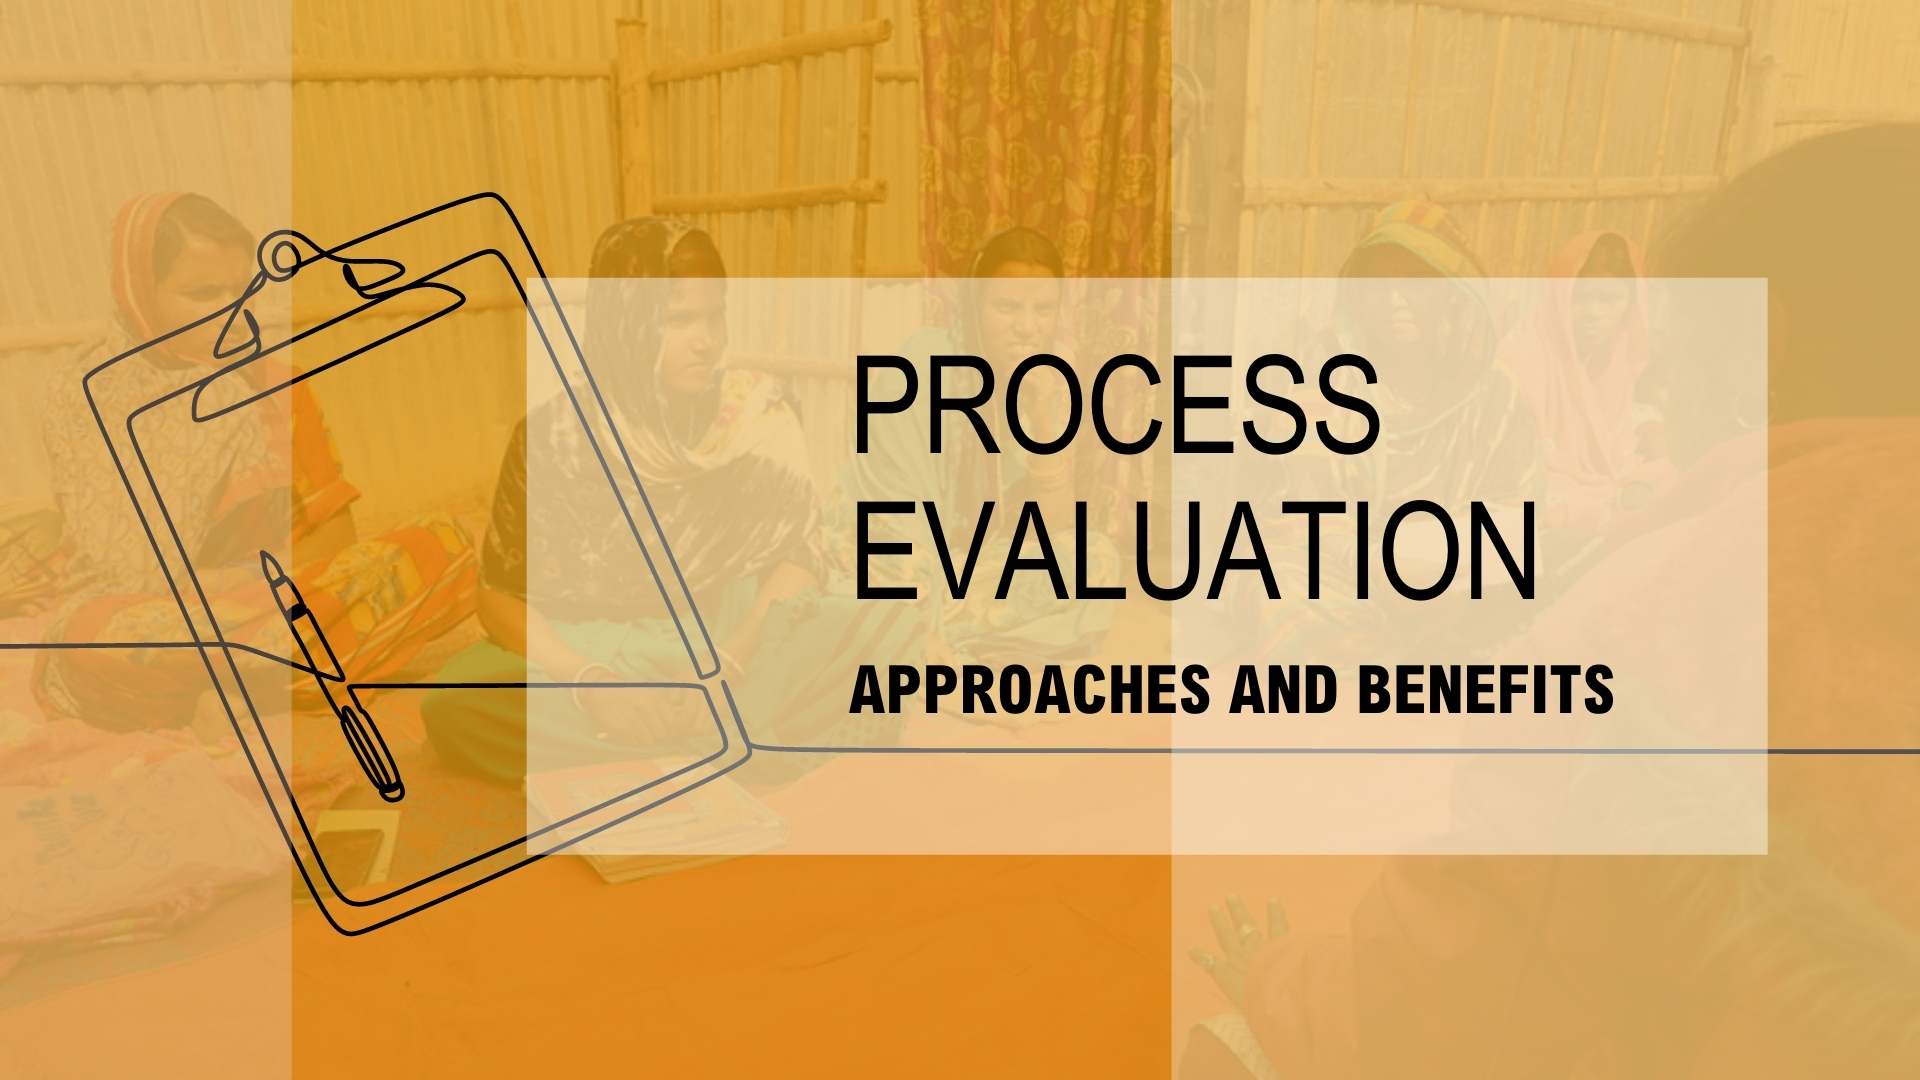 How process evaluation can help improve program design and implementation